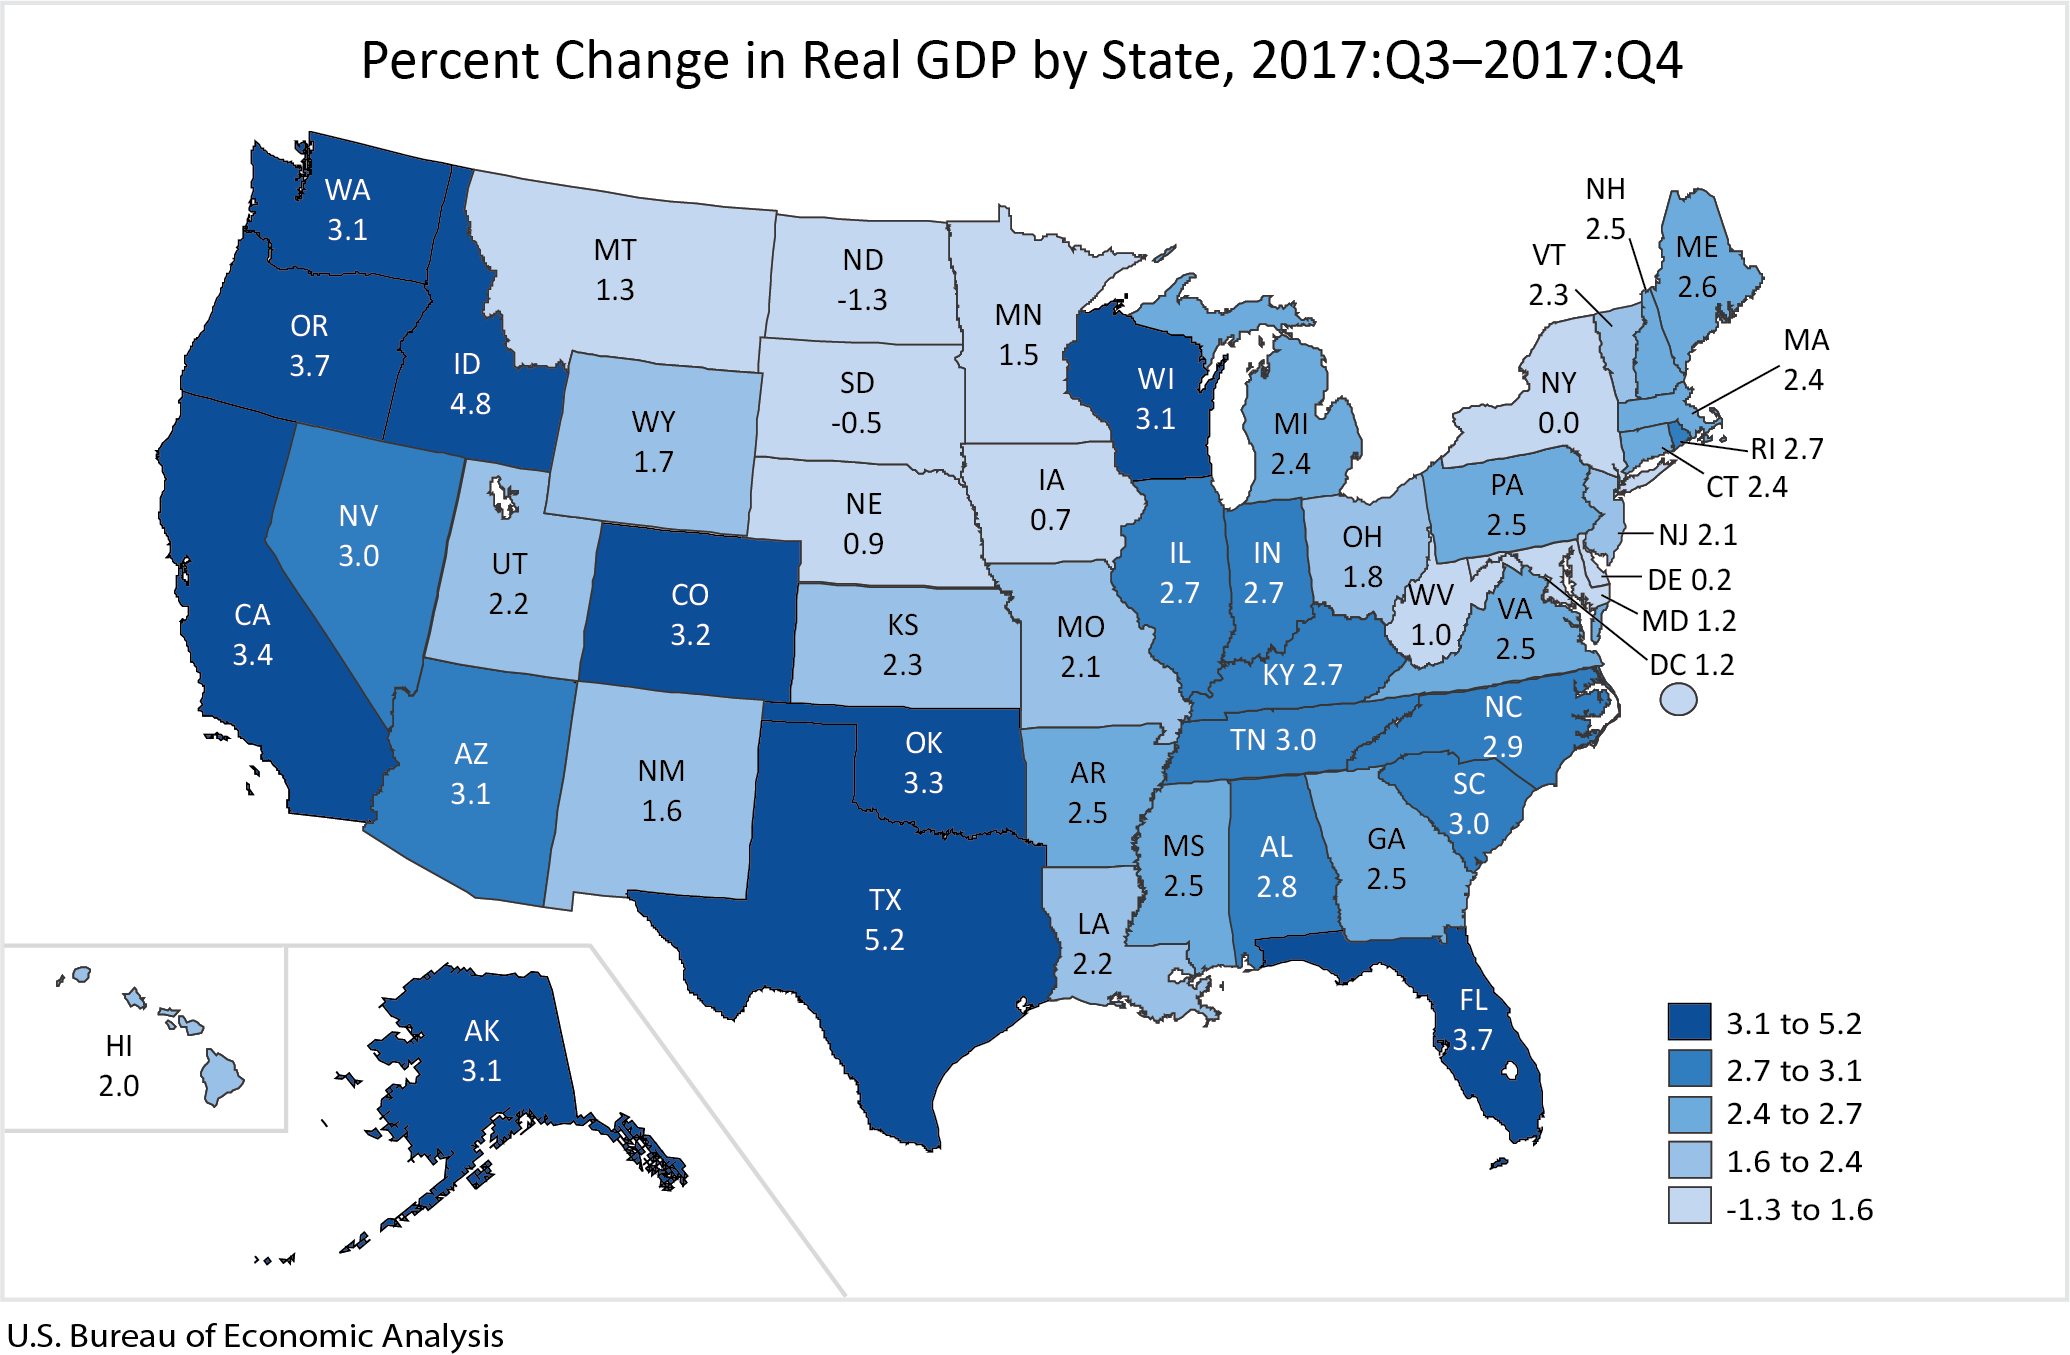 Map showing Percent Change in Real GDP by State.